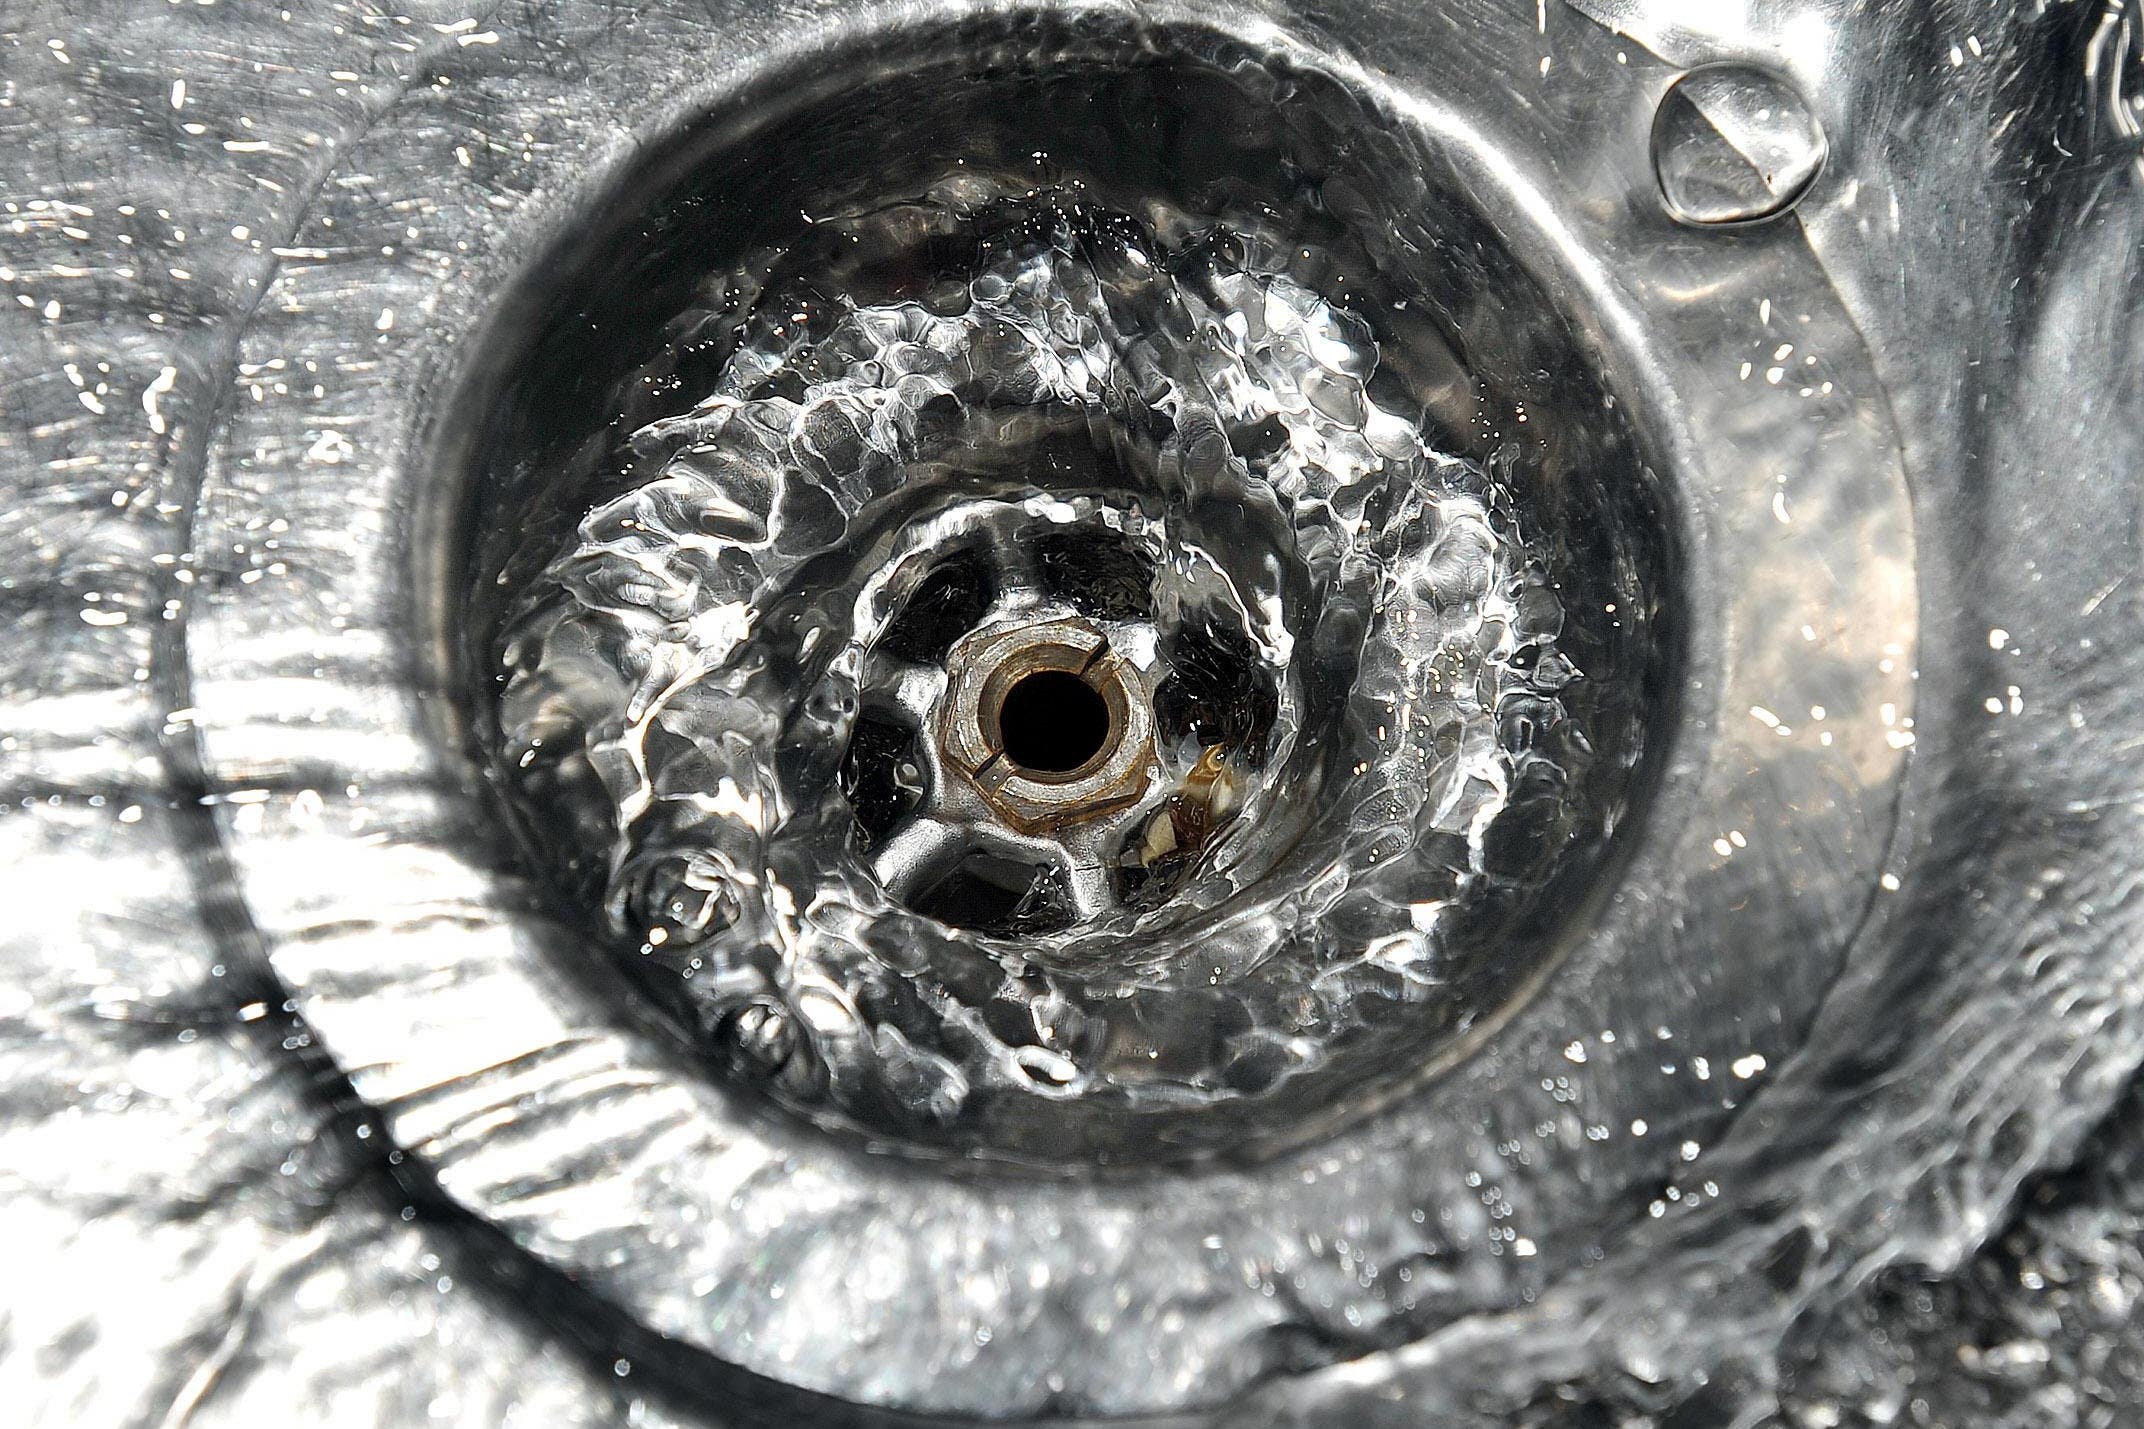 Blocked drains are a top reason for callouts on the Monday bank holiday, according to HomeServe (PA)